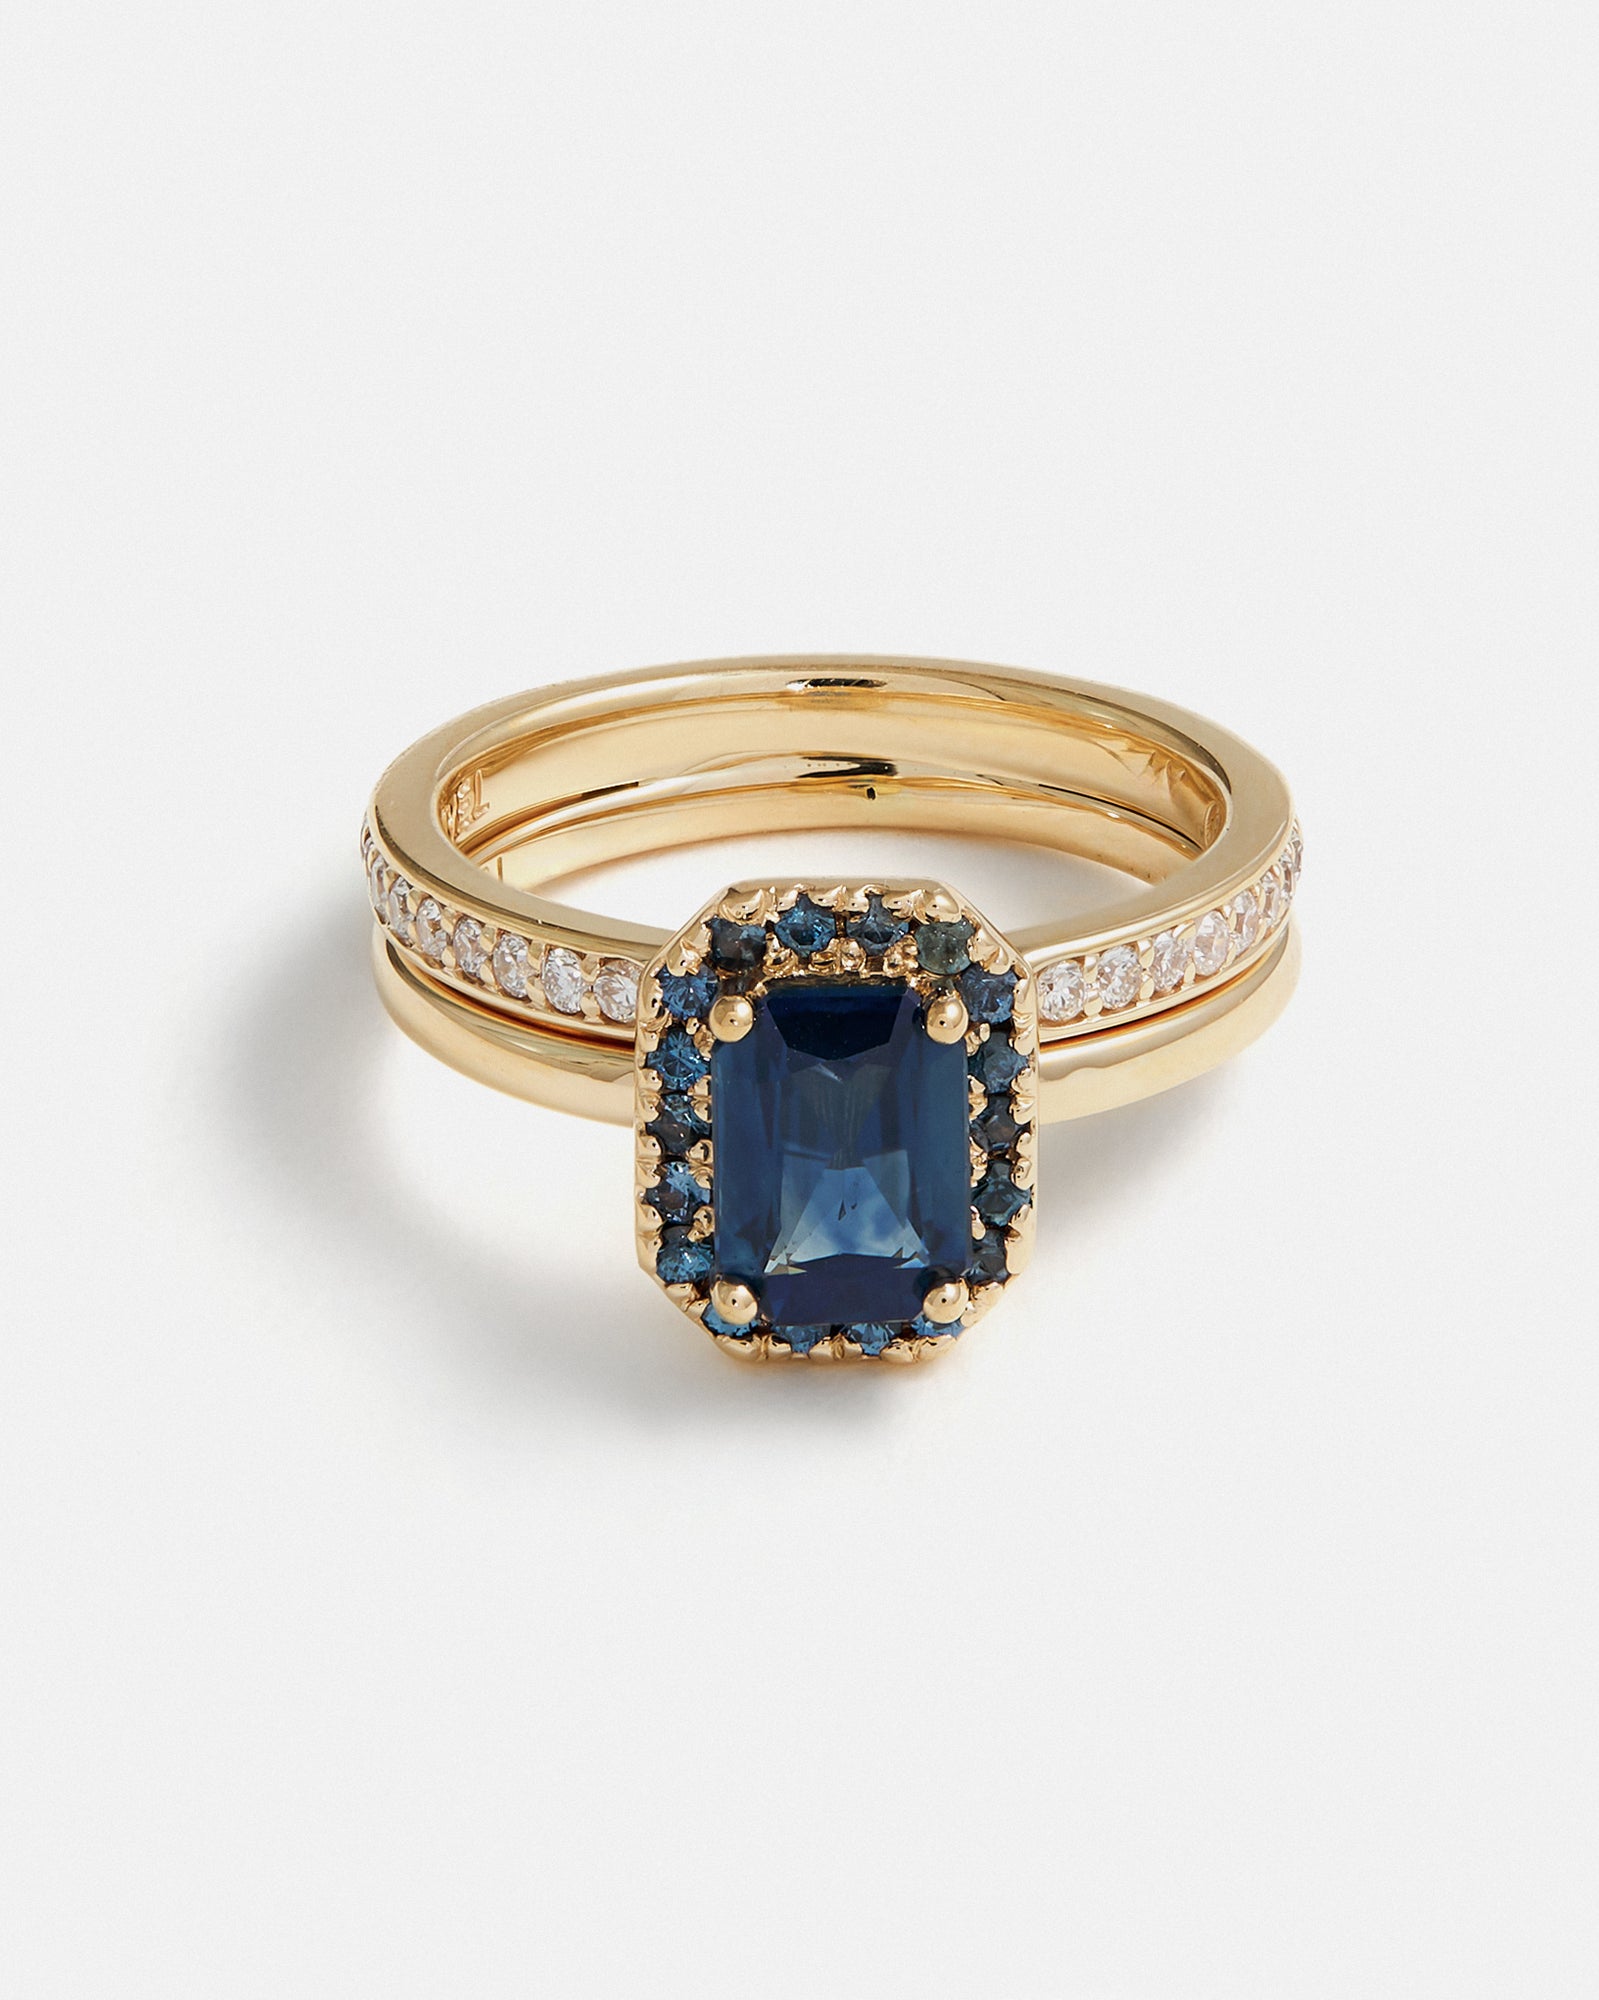 Custom Ring - Off Set Halo Emerald Cut Ring in Fairmined Gold with Australian Sapphire and Blue Spinels